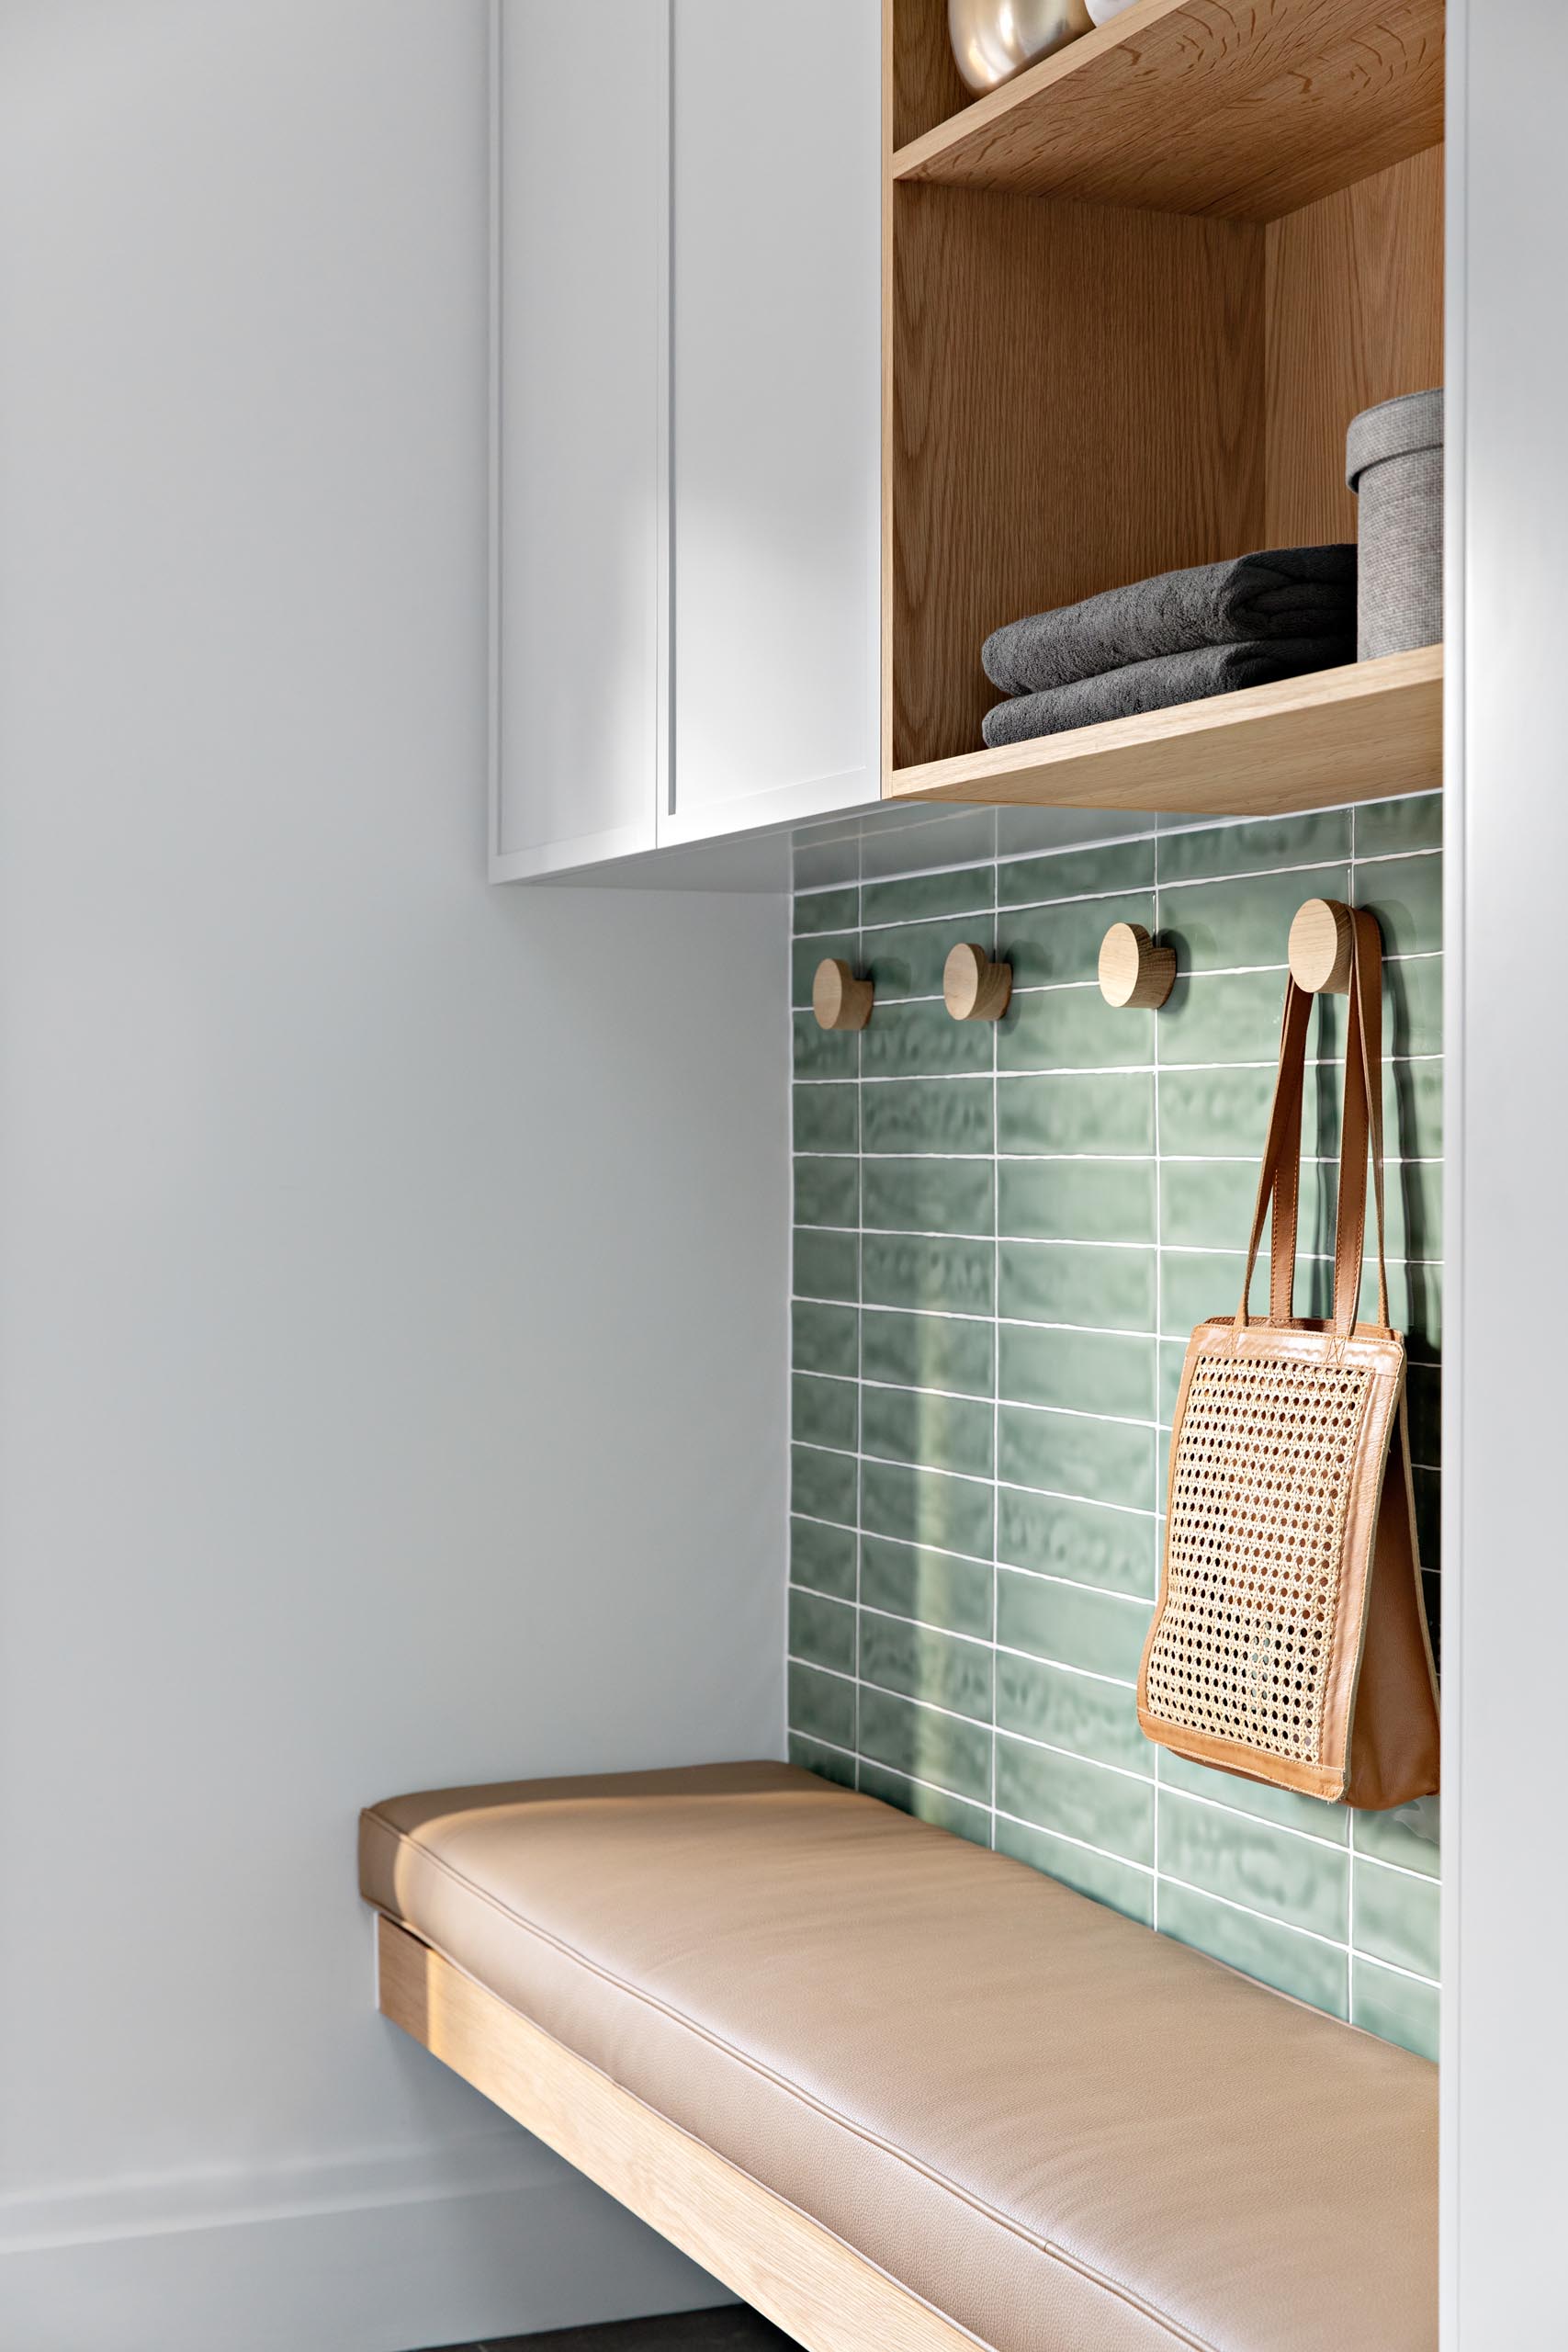 A small mud room with soft green tiles, a wood bench with brown leather cushion, round wood hooks, and a cabinet with open wood shelving.